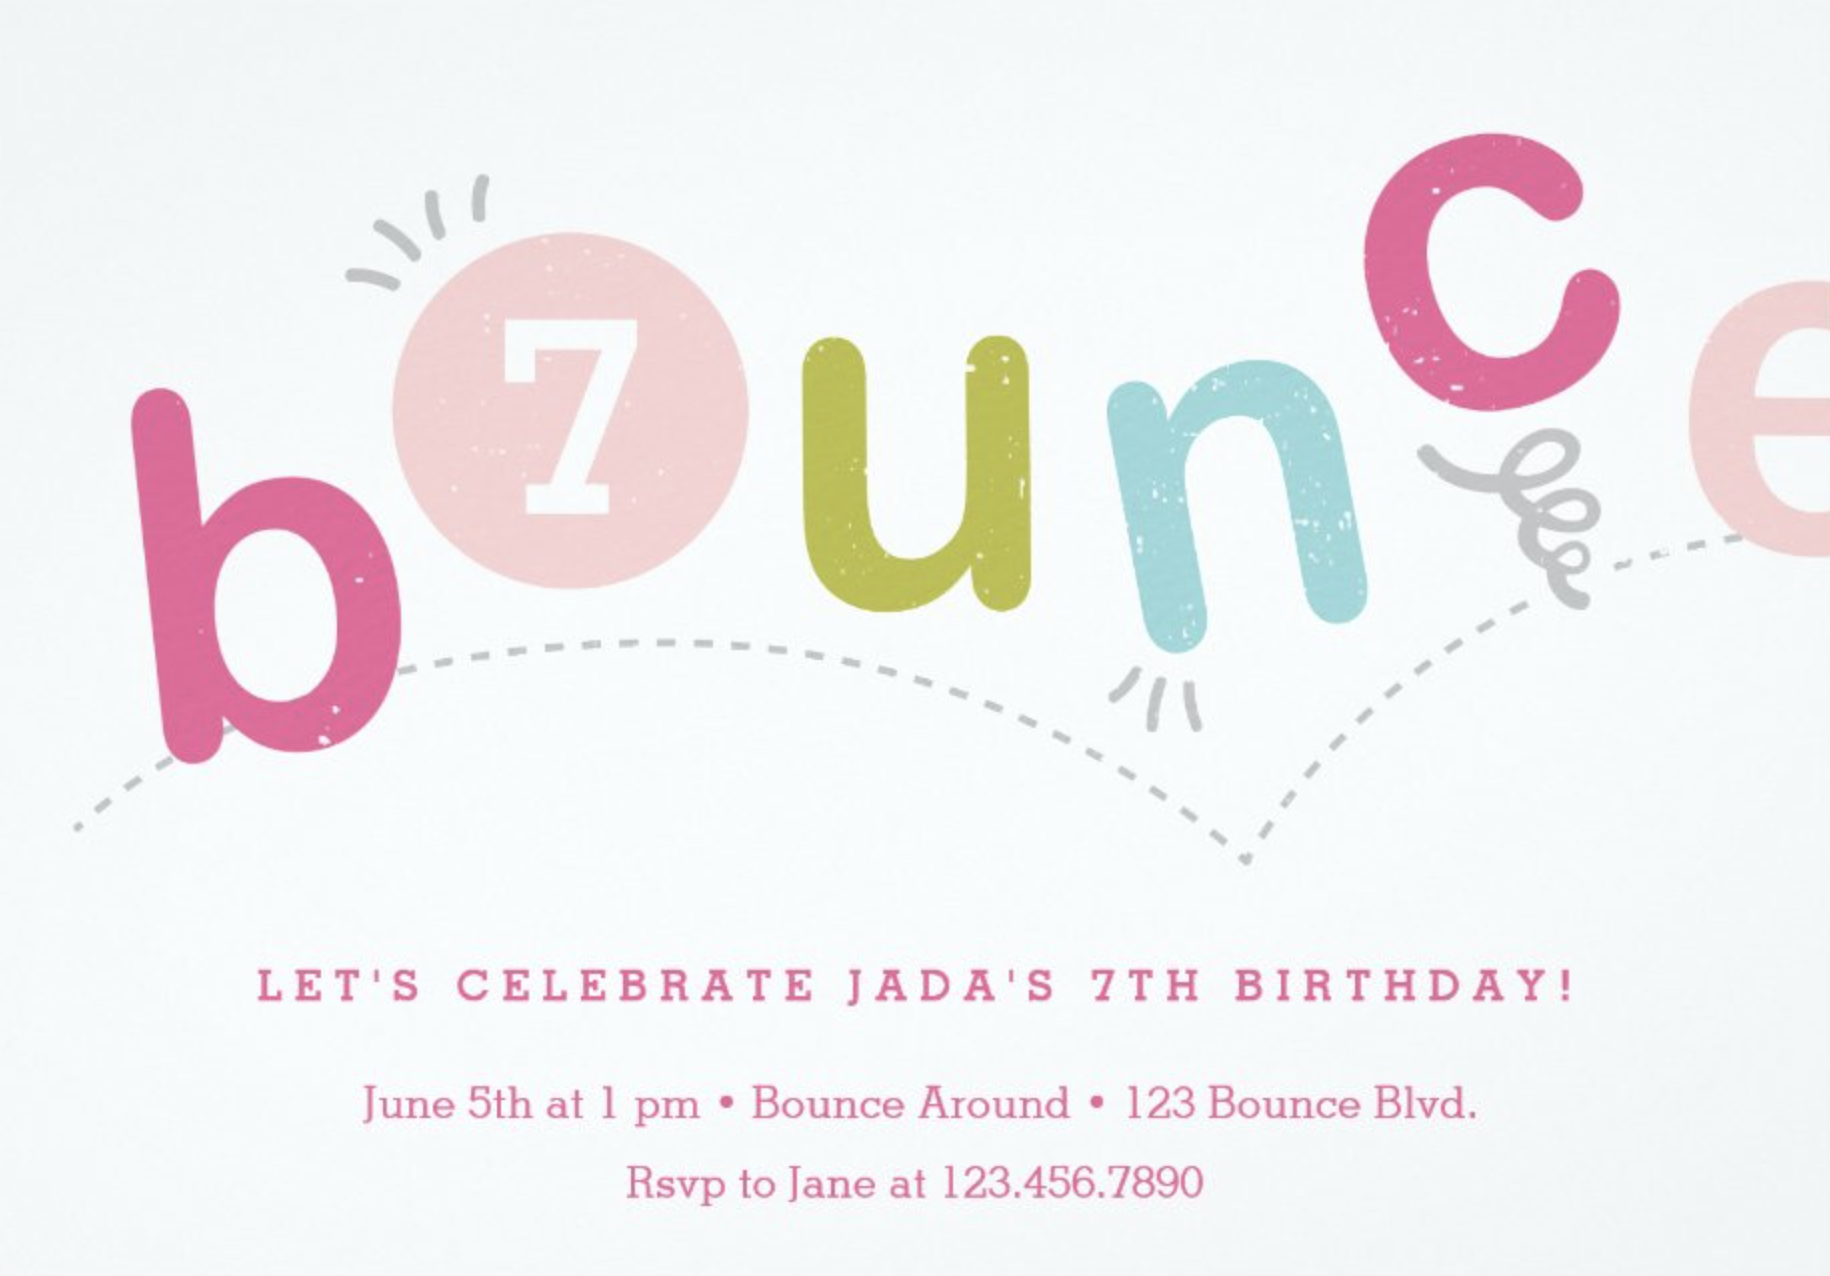 Bounce Birthday Party Invitation with Age by Stacey Meacham